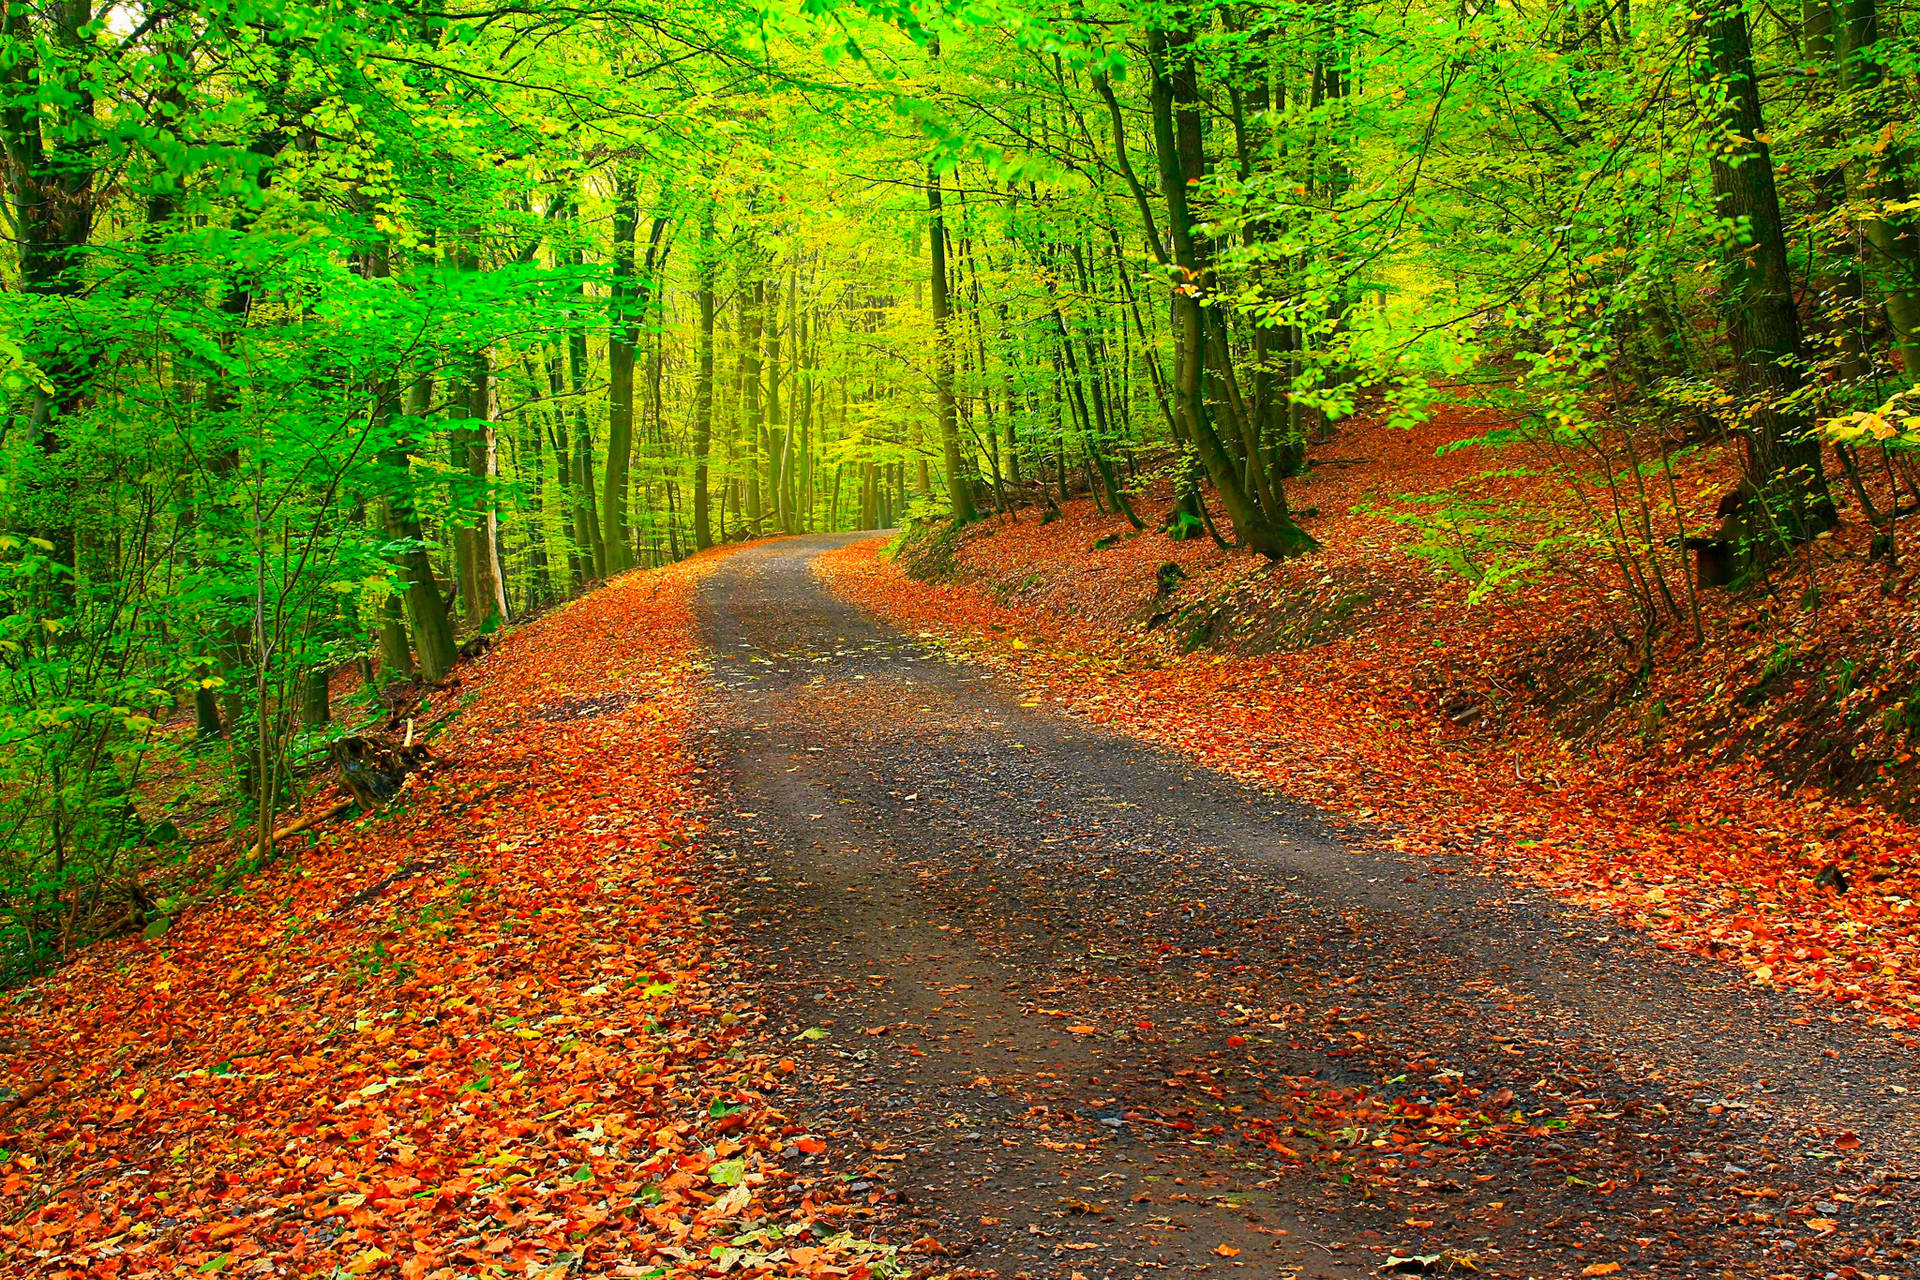 Country road with orange fallen leaves on path and bright green trees on roadside during autumn season.